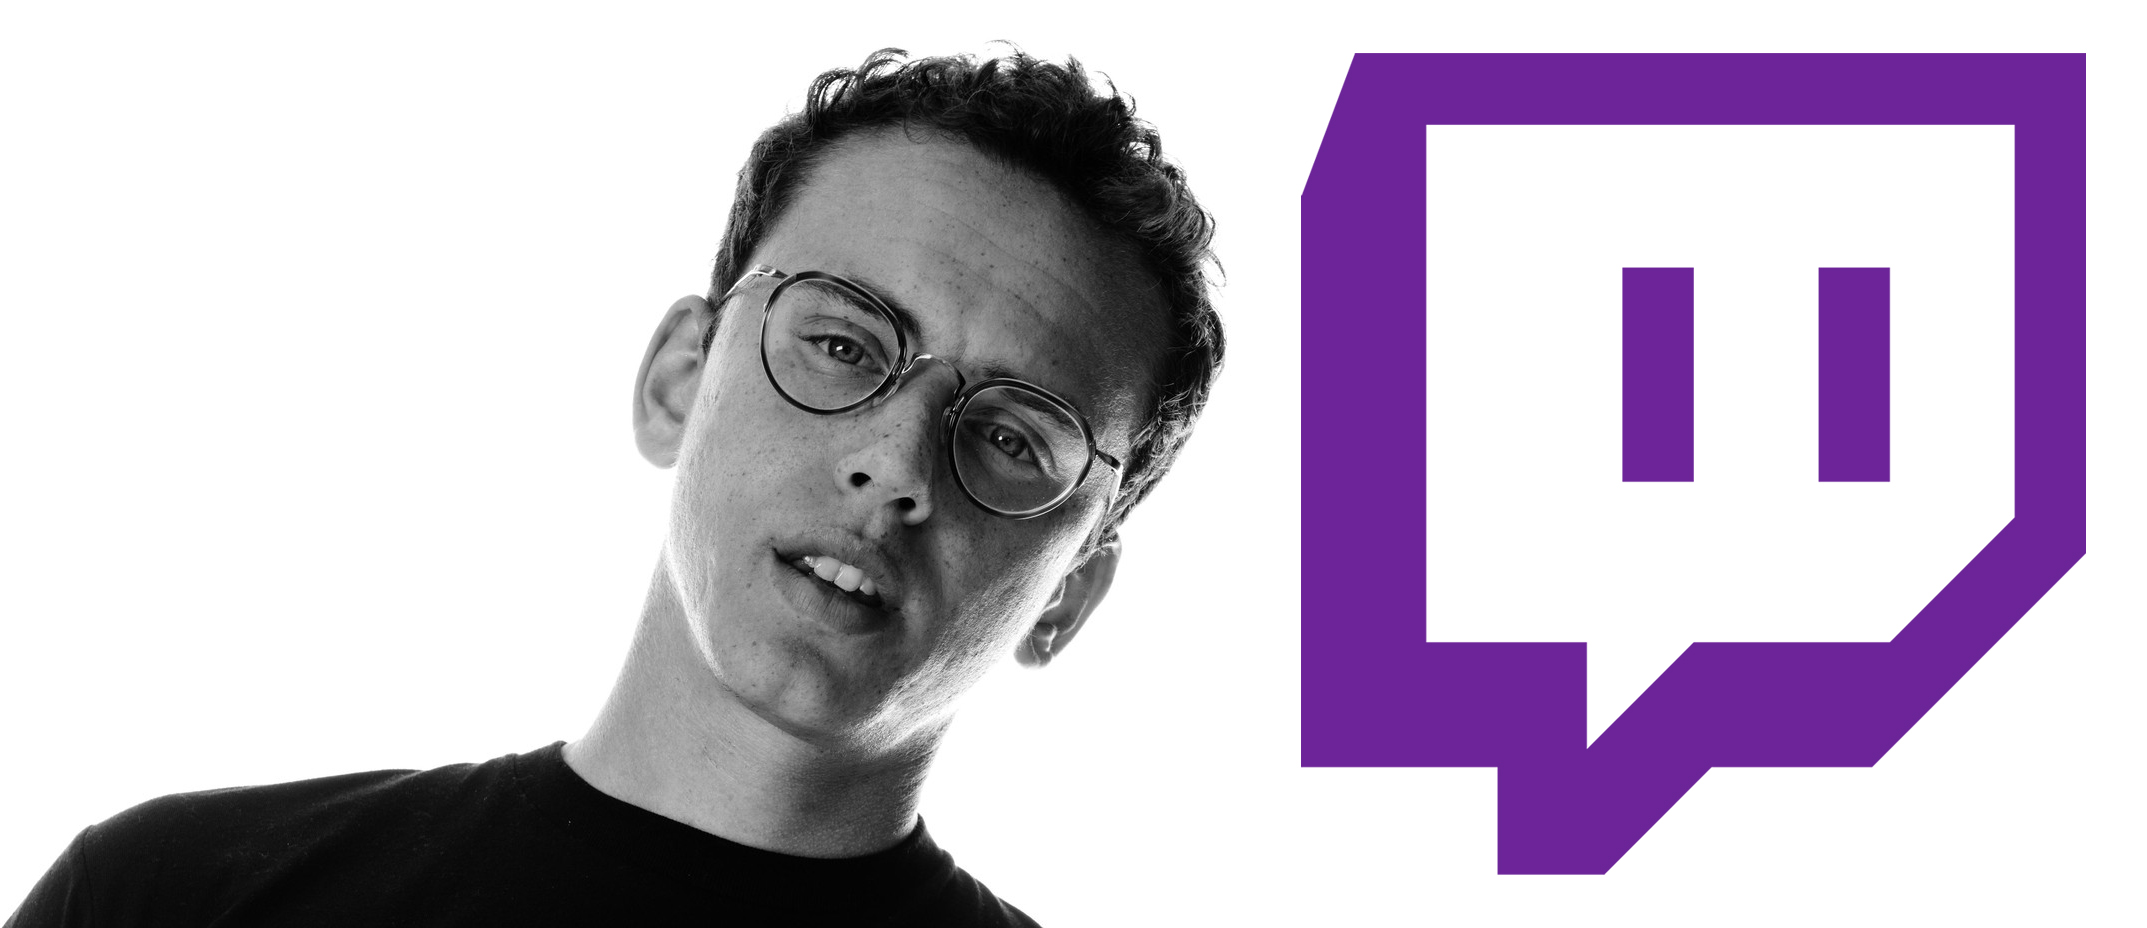 Logic signs an exclusive seven figure deal with Twitch